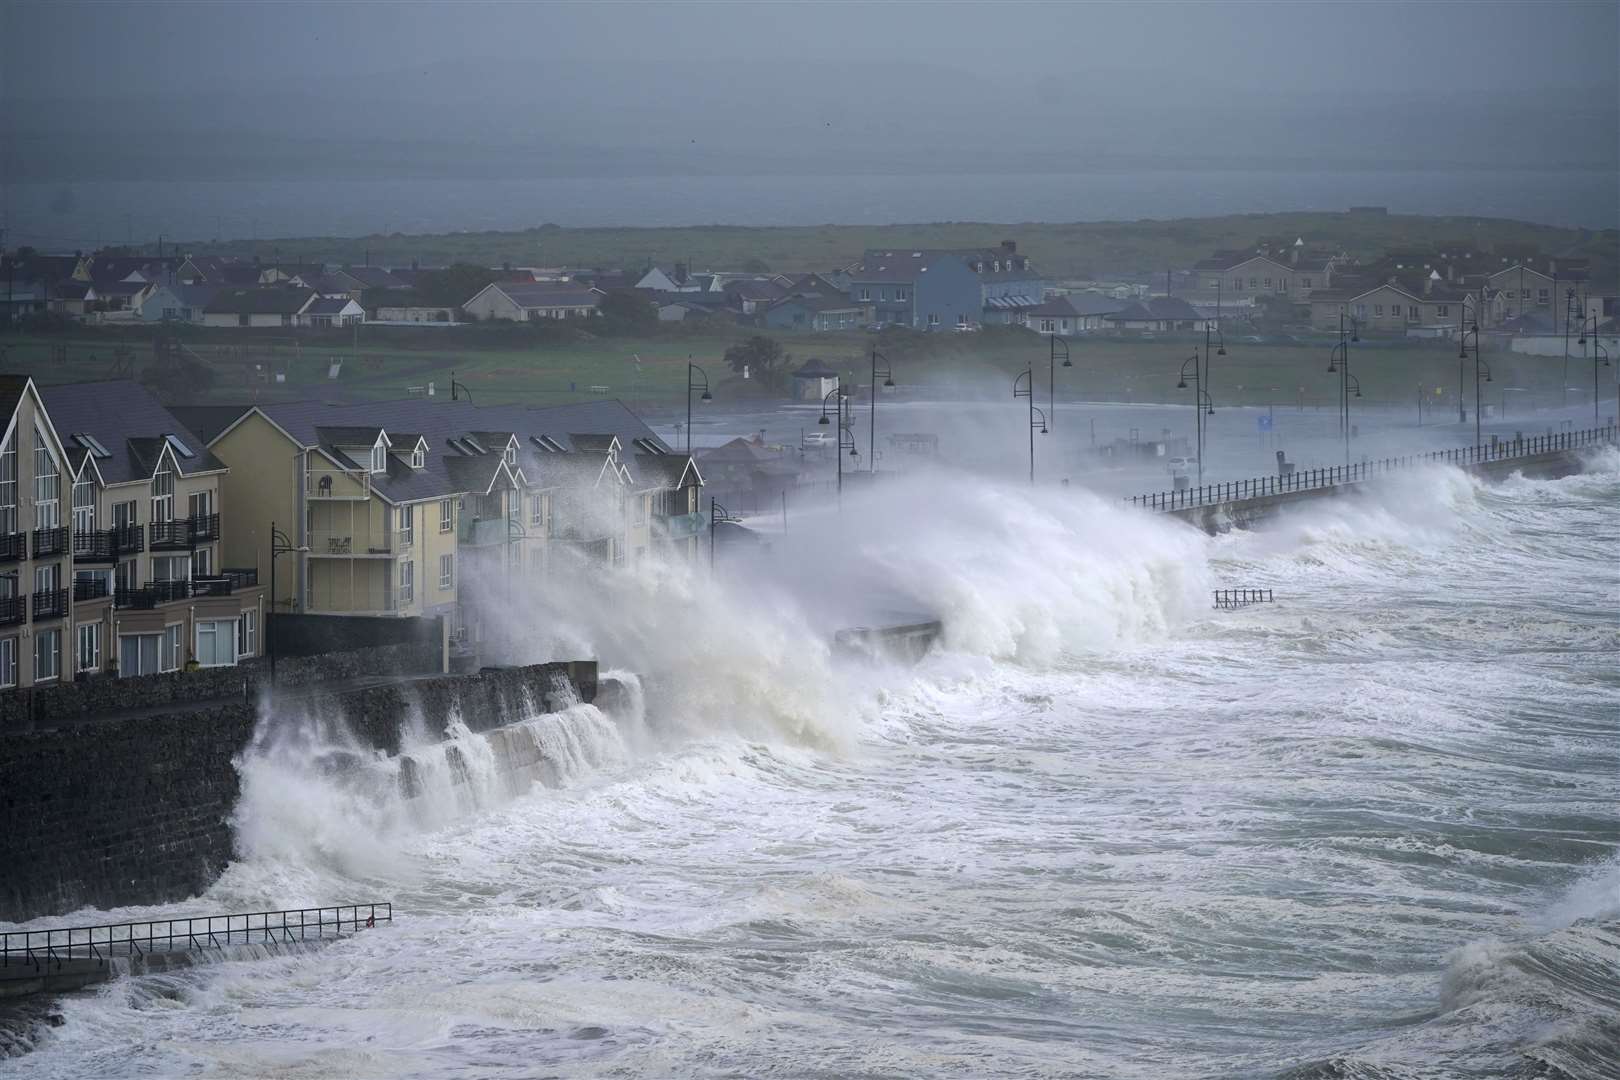 Waves at high tide in Tramore, County Waterford, as Storm Agnes hit the UK and Ireland in late September bringing heavy winds and rain and causing damage to buildings, power outages and travel disruption (Niall Carson/PA)